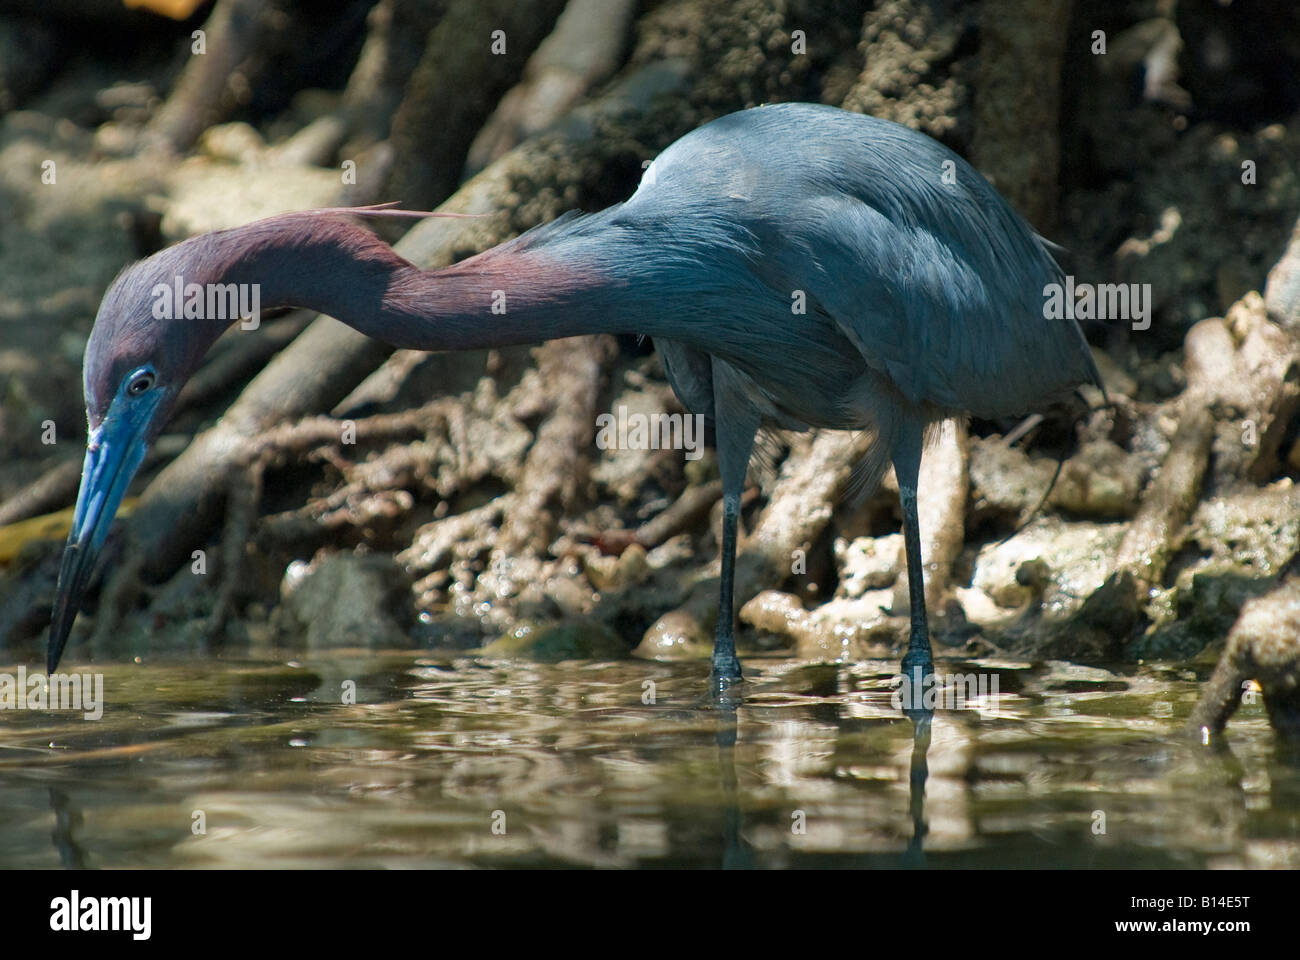 Little Blue Heron with breeding plumage hunts for fish in saltwater, Oleta River State Park, Miami, Florida Stock Photo